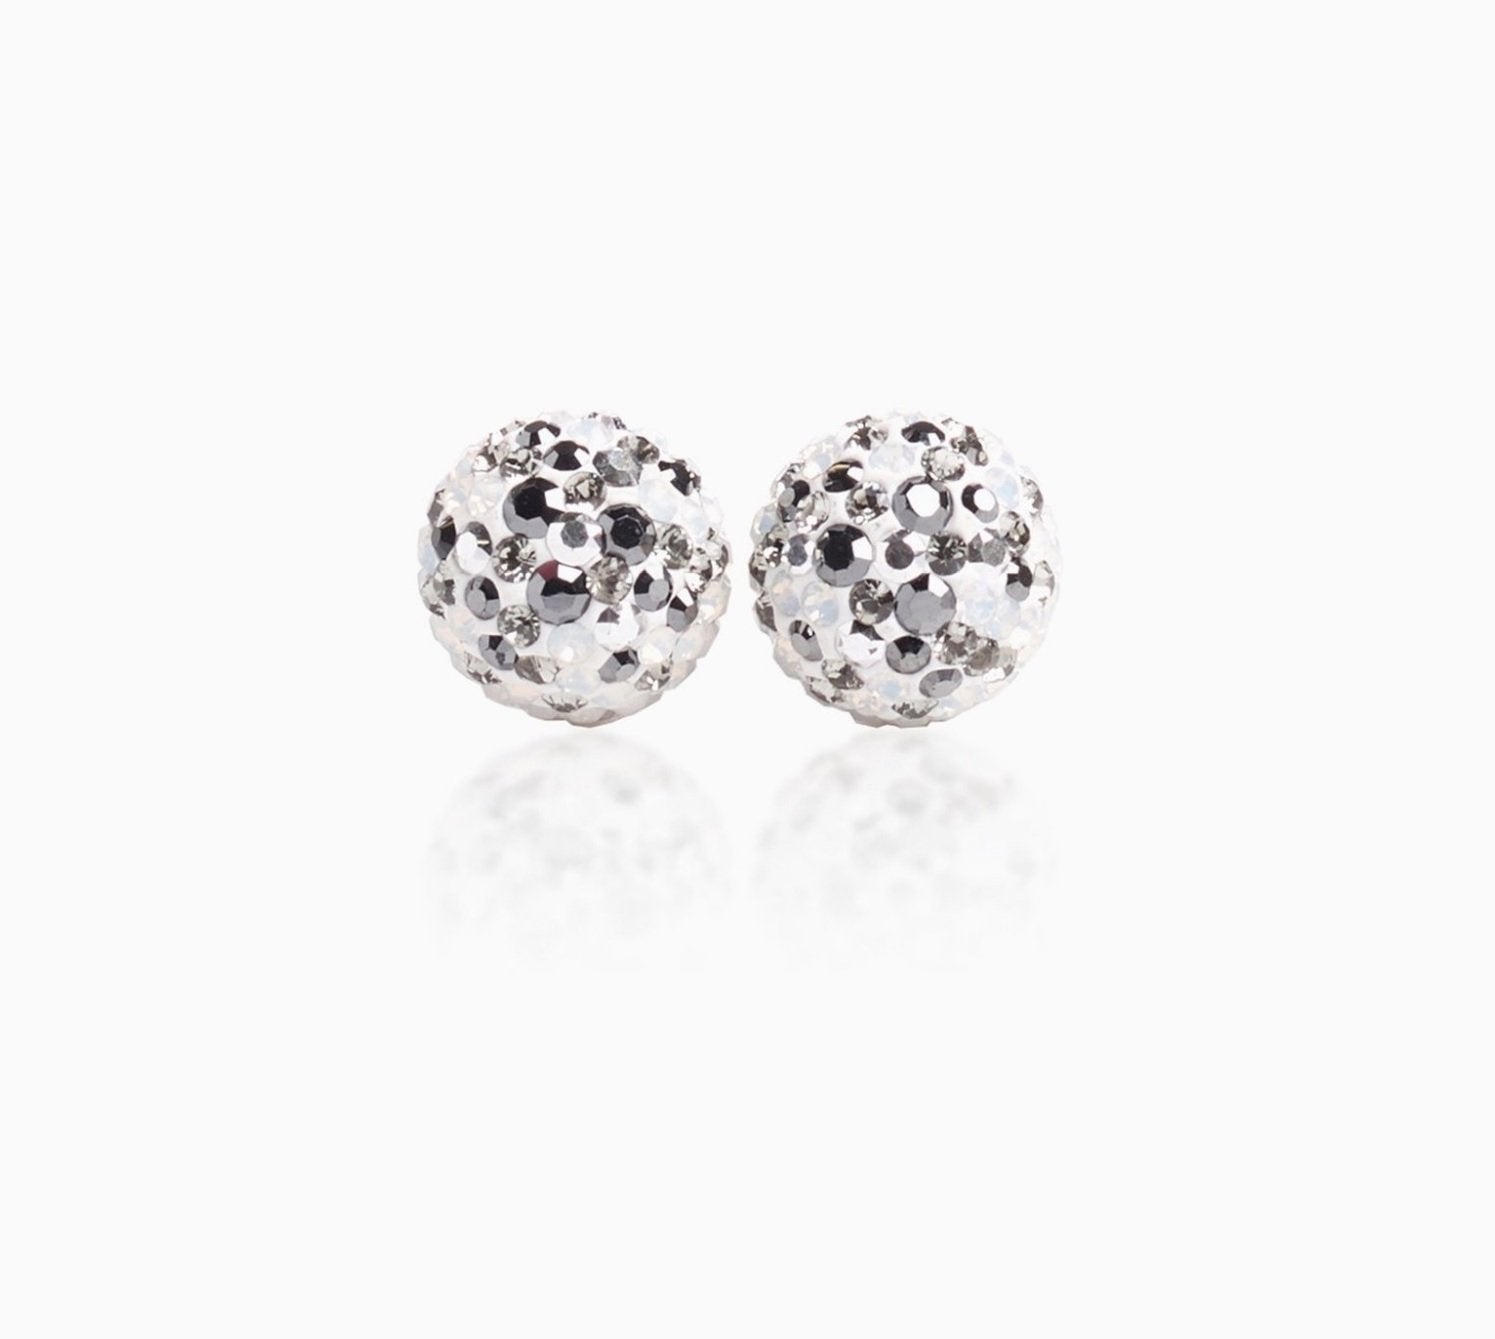 H&B Sparkle Ball™ Stud Earrings - 10mm Avalanche